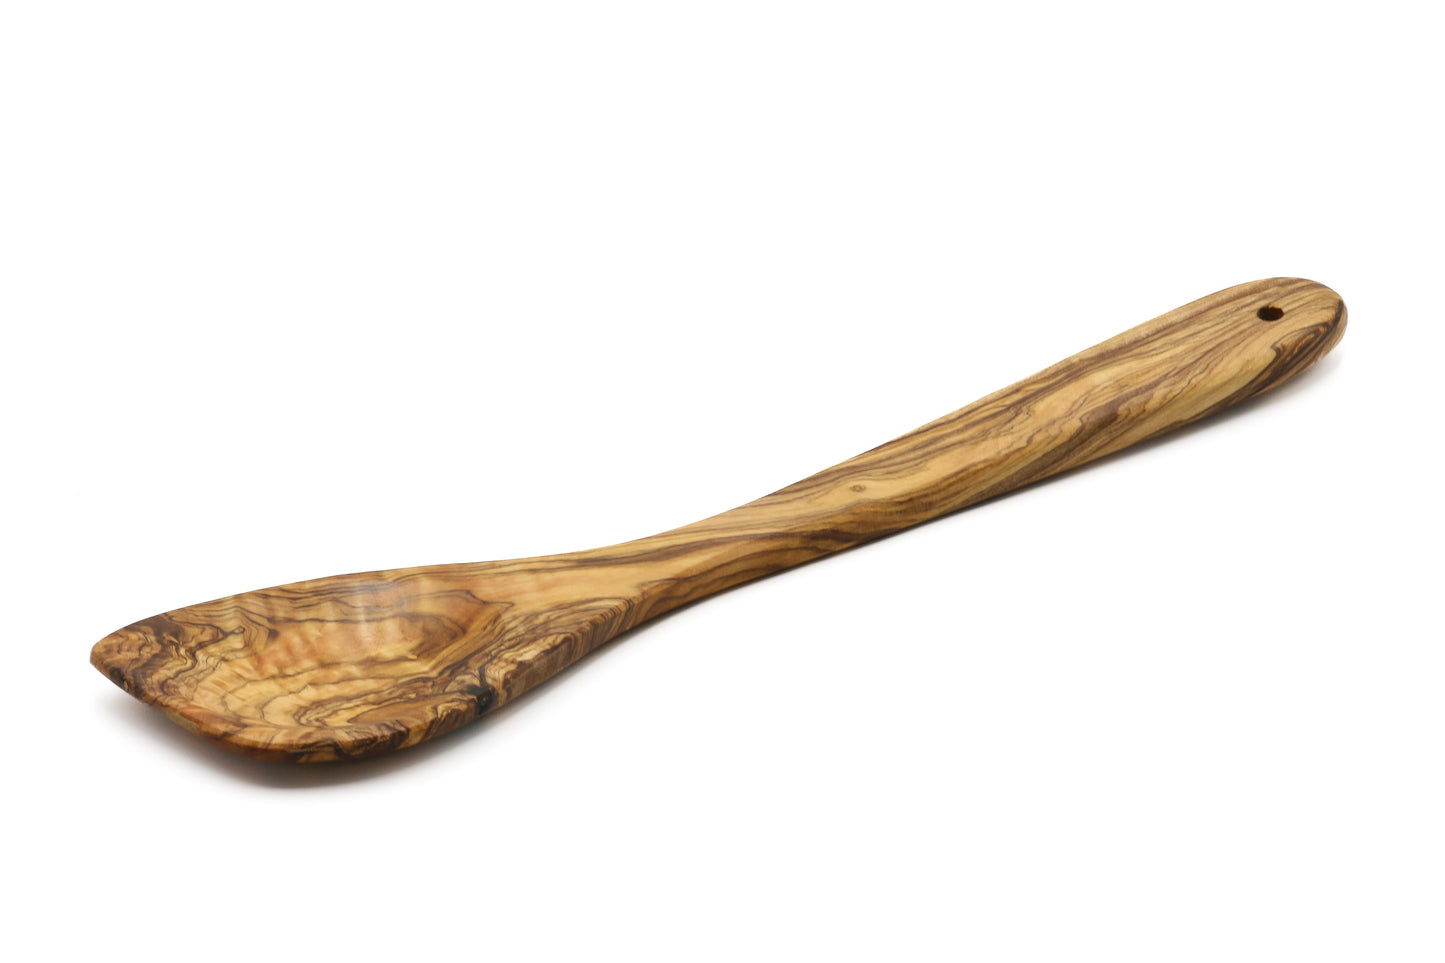 Olive wood pointed stirring, cooking, and baking spoon